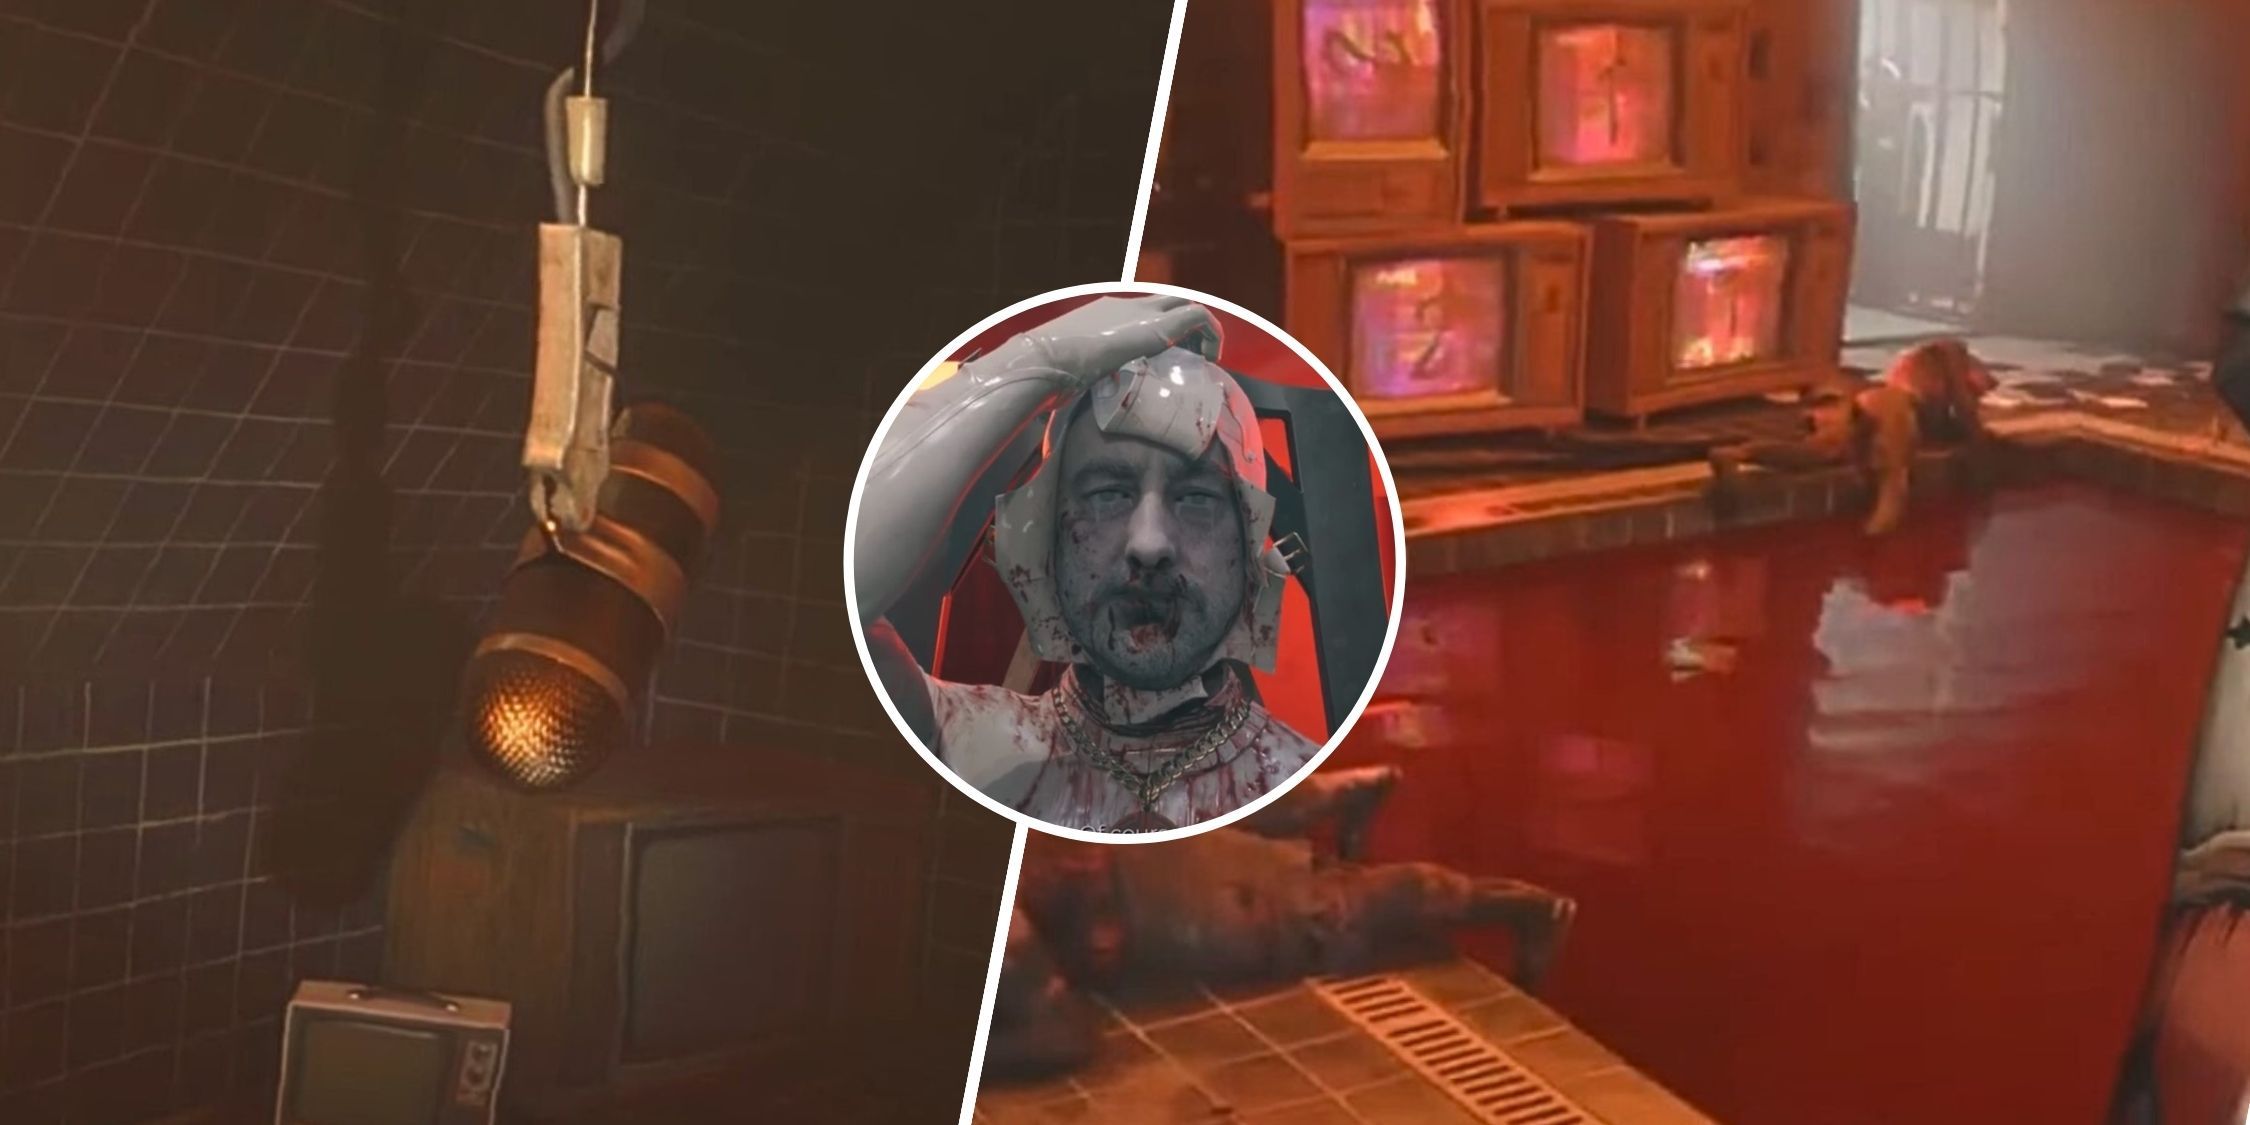 The Dead Island 2 character has accepted The Invitation quest from Vincent to find The Rite of Passage in Haus.